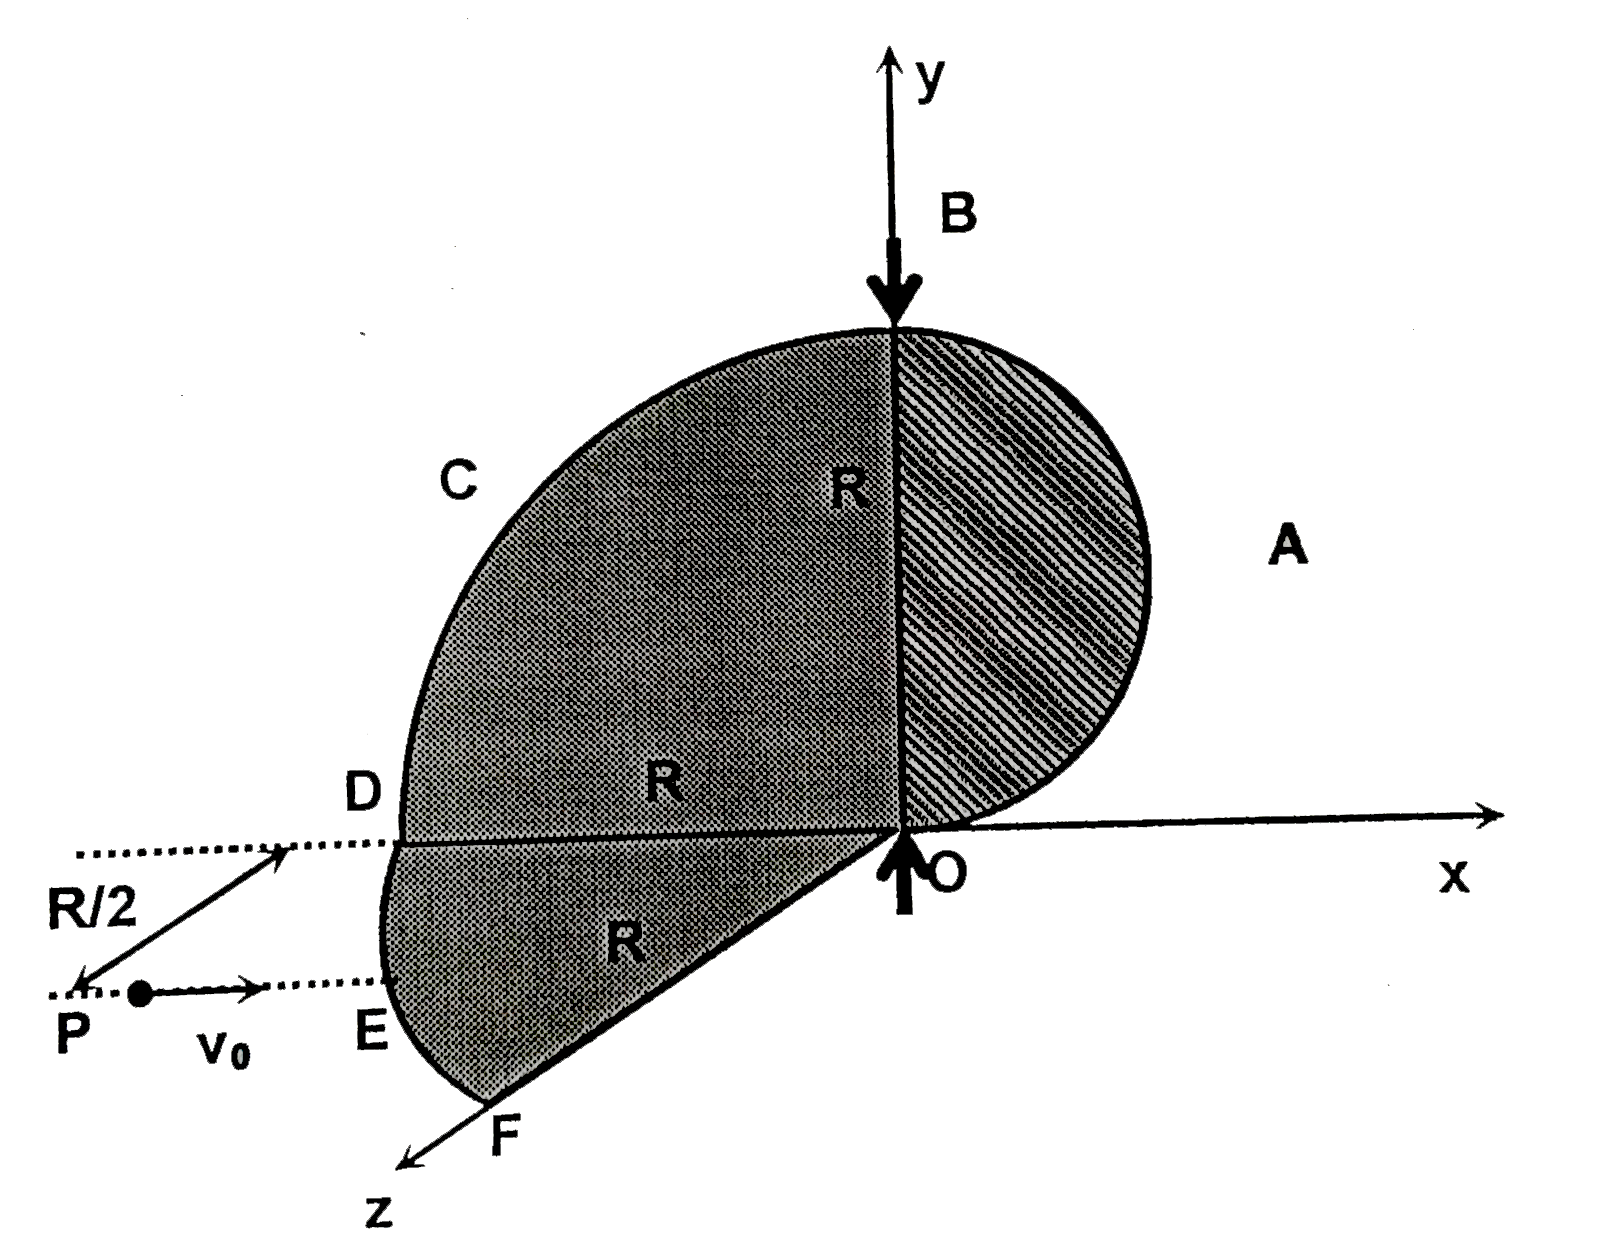 A folded plate OABCDEFO made of materials such that part OABO (say part(i), BCDOB hs mass 4m, m and m respectively. Part (i) is a uniform semicircular plate of radius R//2 and in on the xy plane. Part (ii) and (iii) each is a uniform quarter circular plate of radius R on xy and xz plane respectively. The whole system is free to rotate about y-axis A particle P of mass m moving with velocity v(0) hits to a point located at the circumcentre of the part (iii) and sticks to it. The point is at a distance R//2 from x -axis as shown in the figure. Angular velocity of the combined system just after the collision is